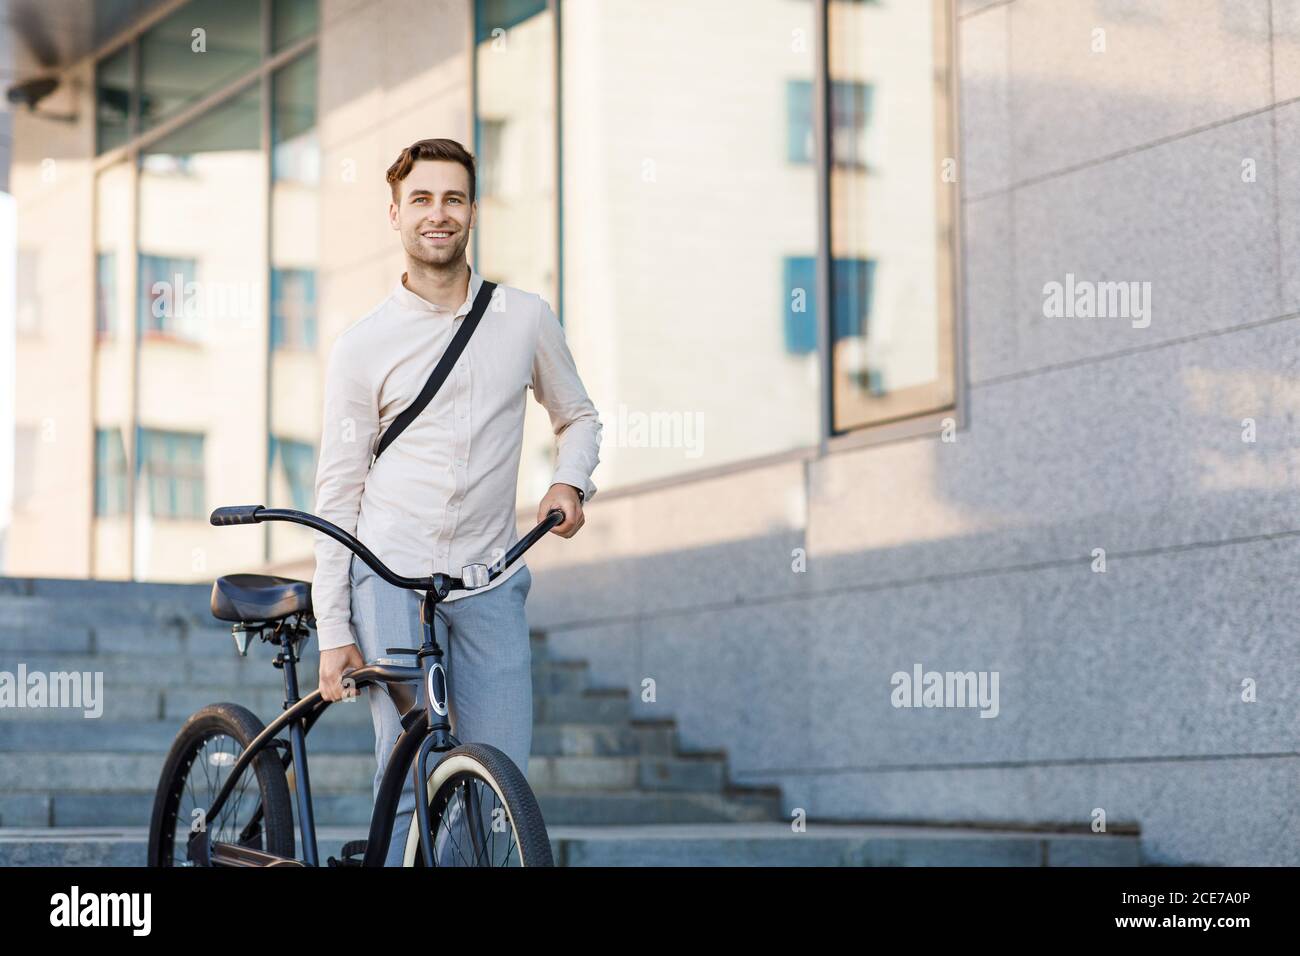 Convenient transport in city. Businessman walking down stairs with bicycle Stock Photo